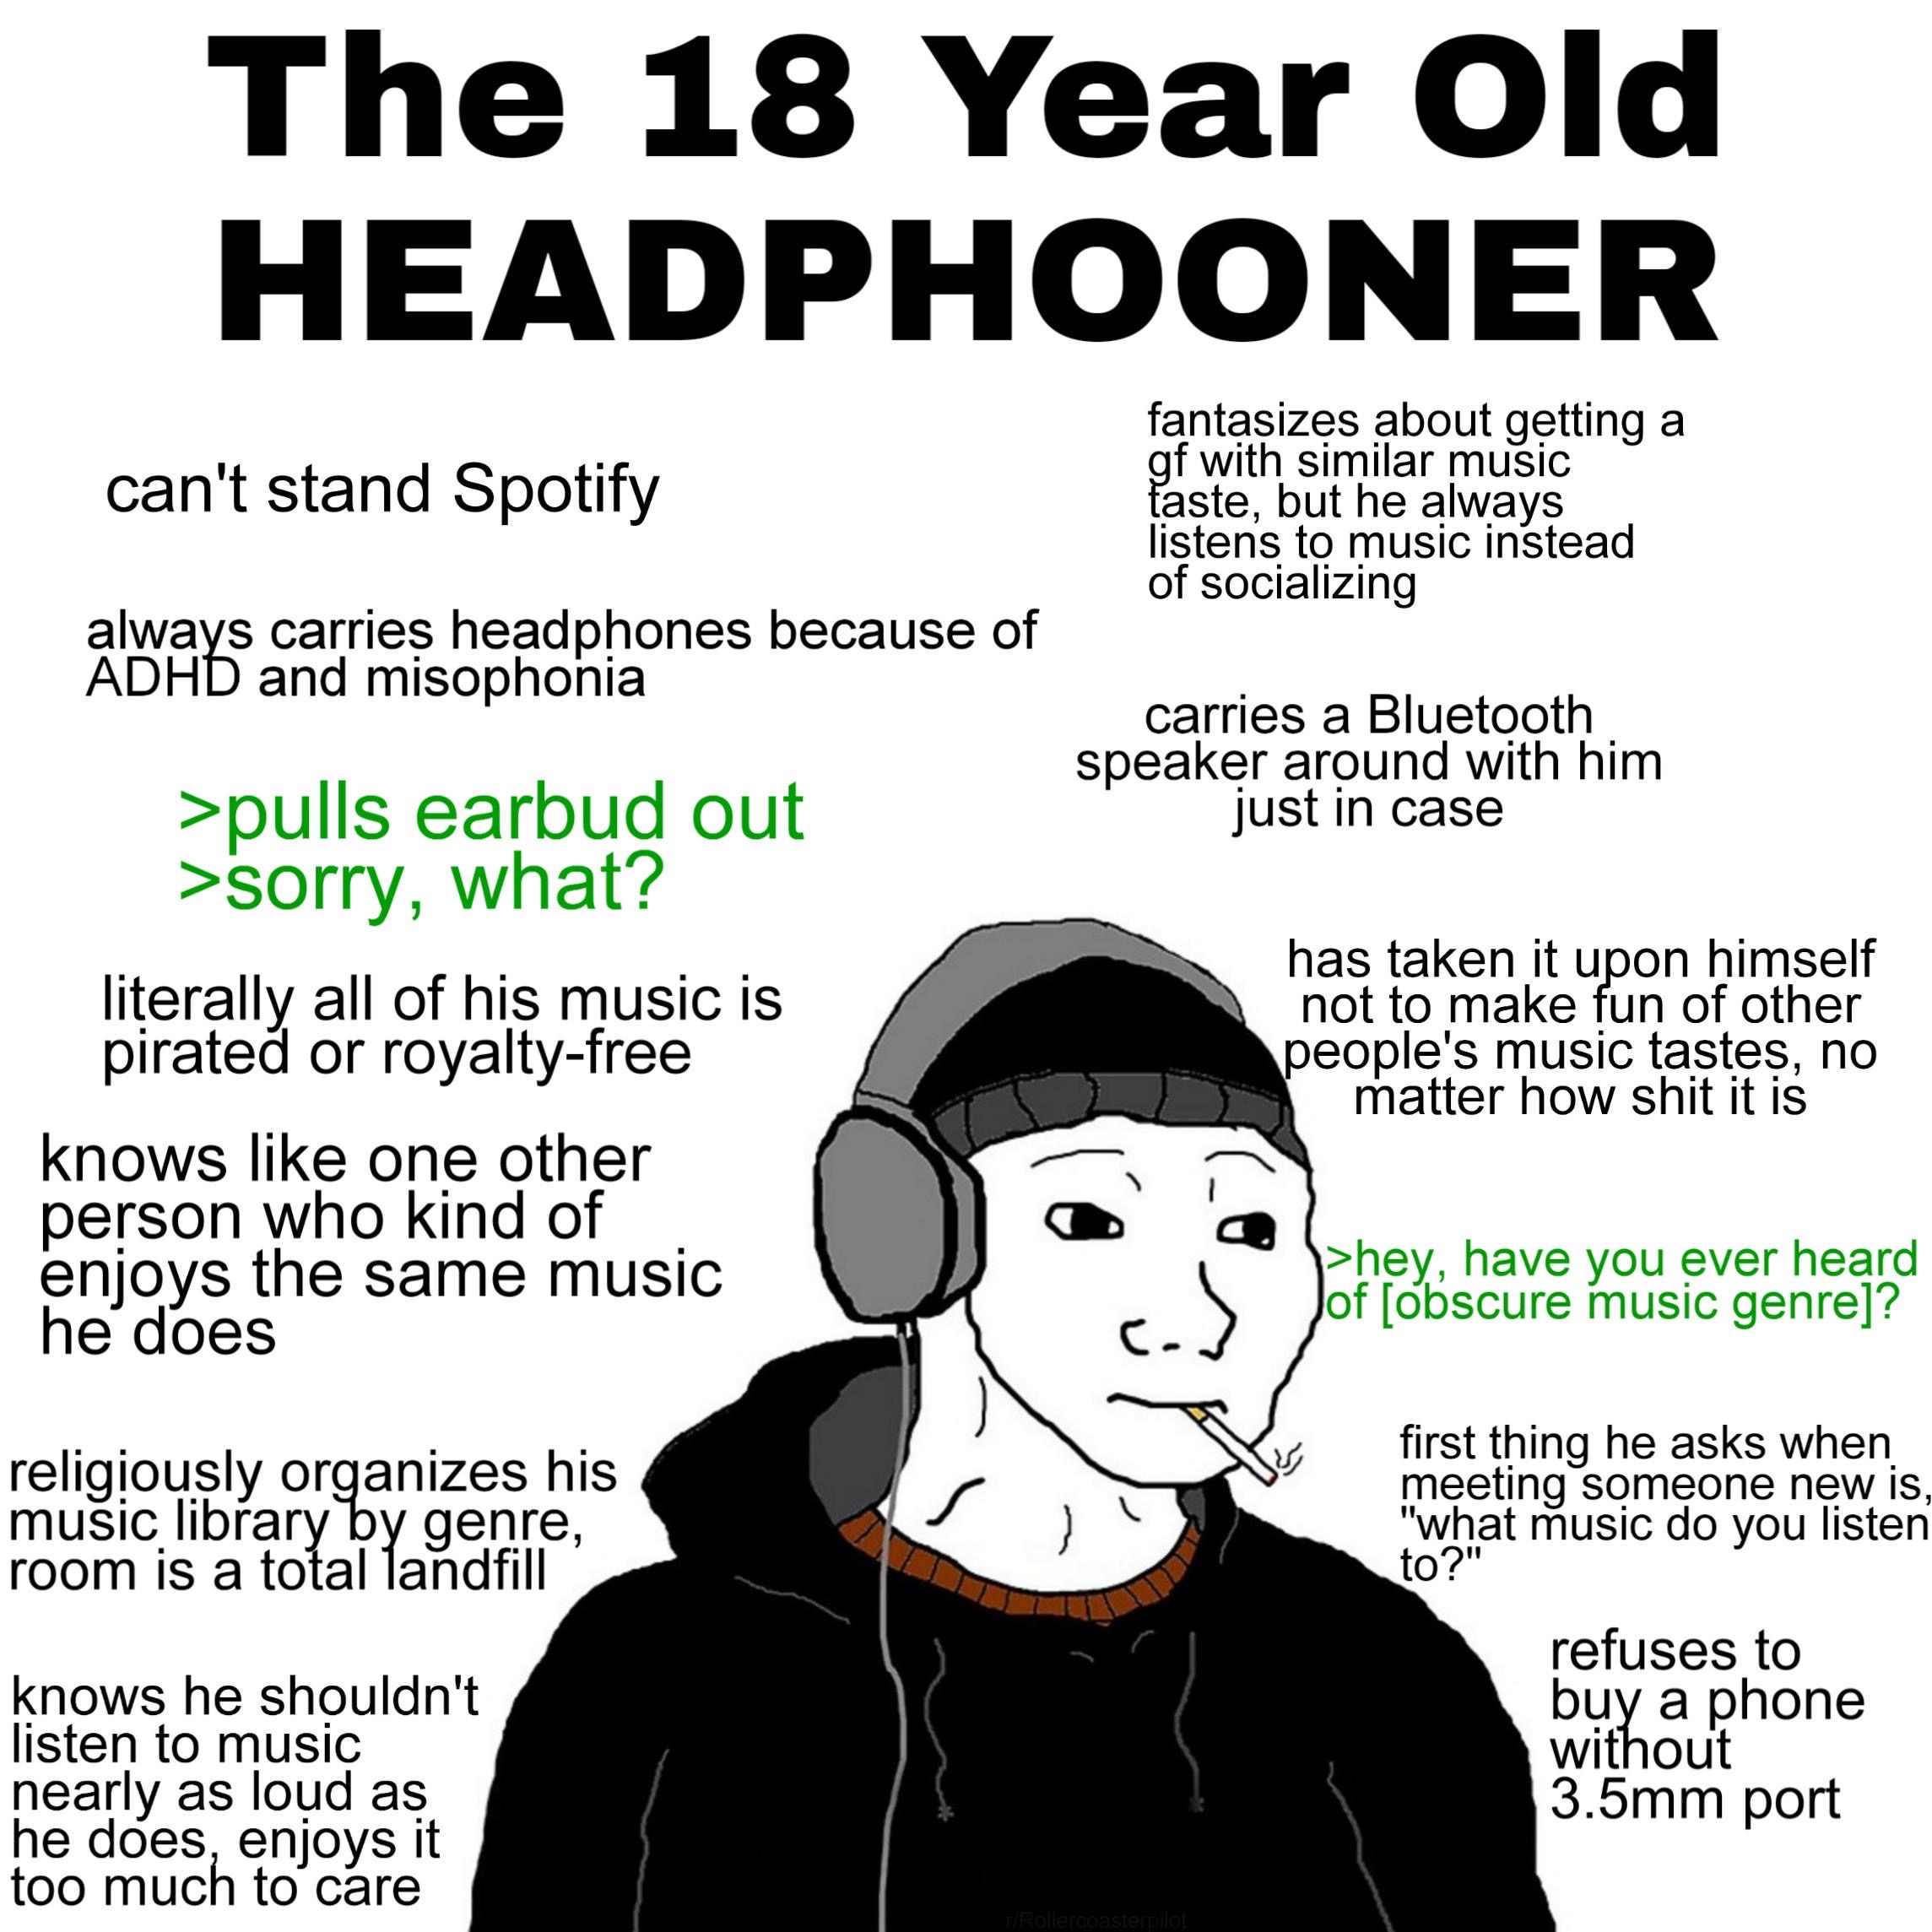 doomer meme - The 18 Year Old Headphooner can't stand Spotify fantasizes about getting a gf with similar music faste, but he always listens to music instead of socializing always carries headphones because of Adhd and misophonia carries a Bluetooth speake